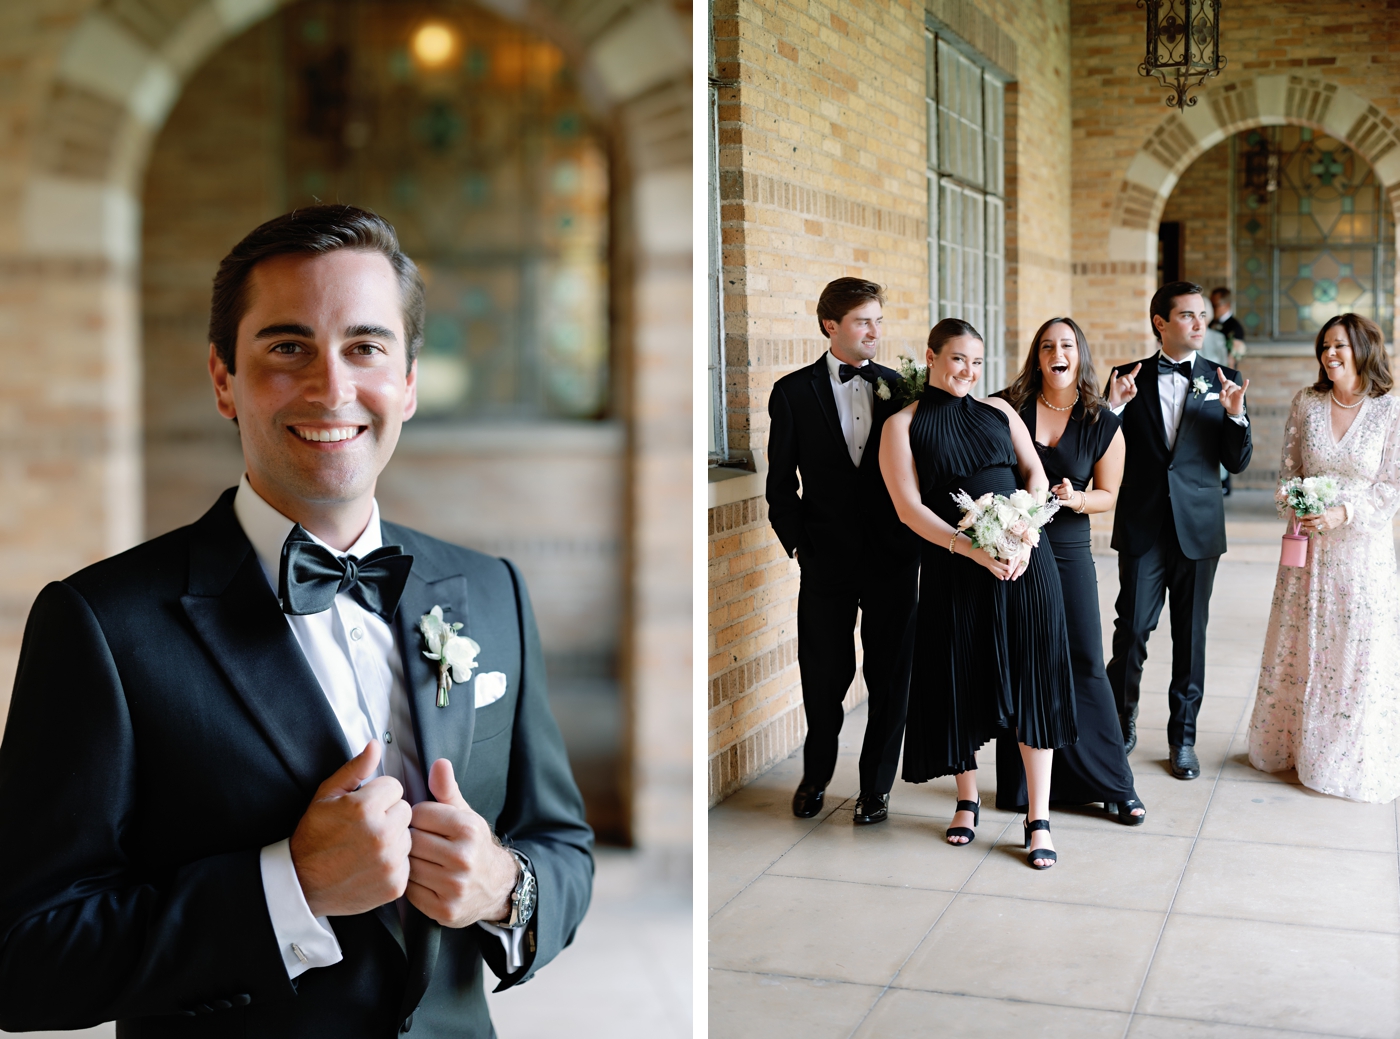 Wedding party pictures at Central Christian Church in Austin